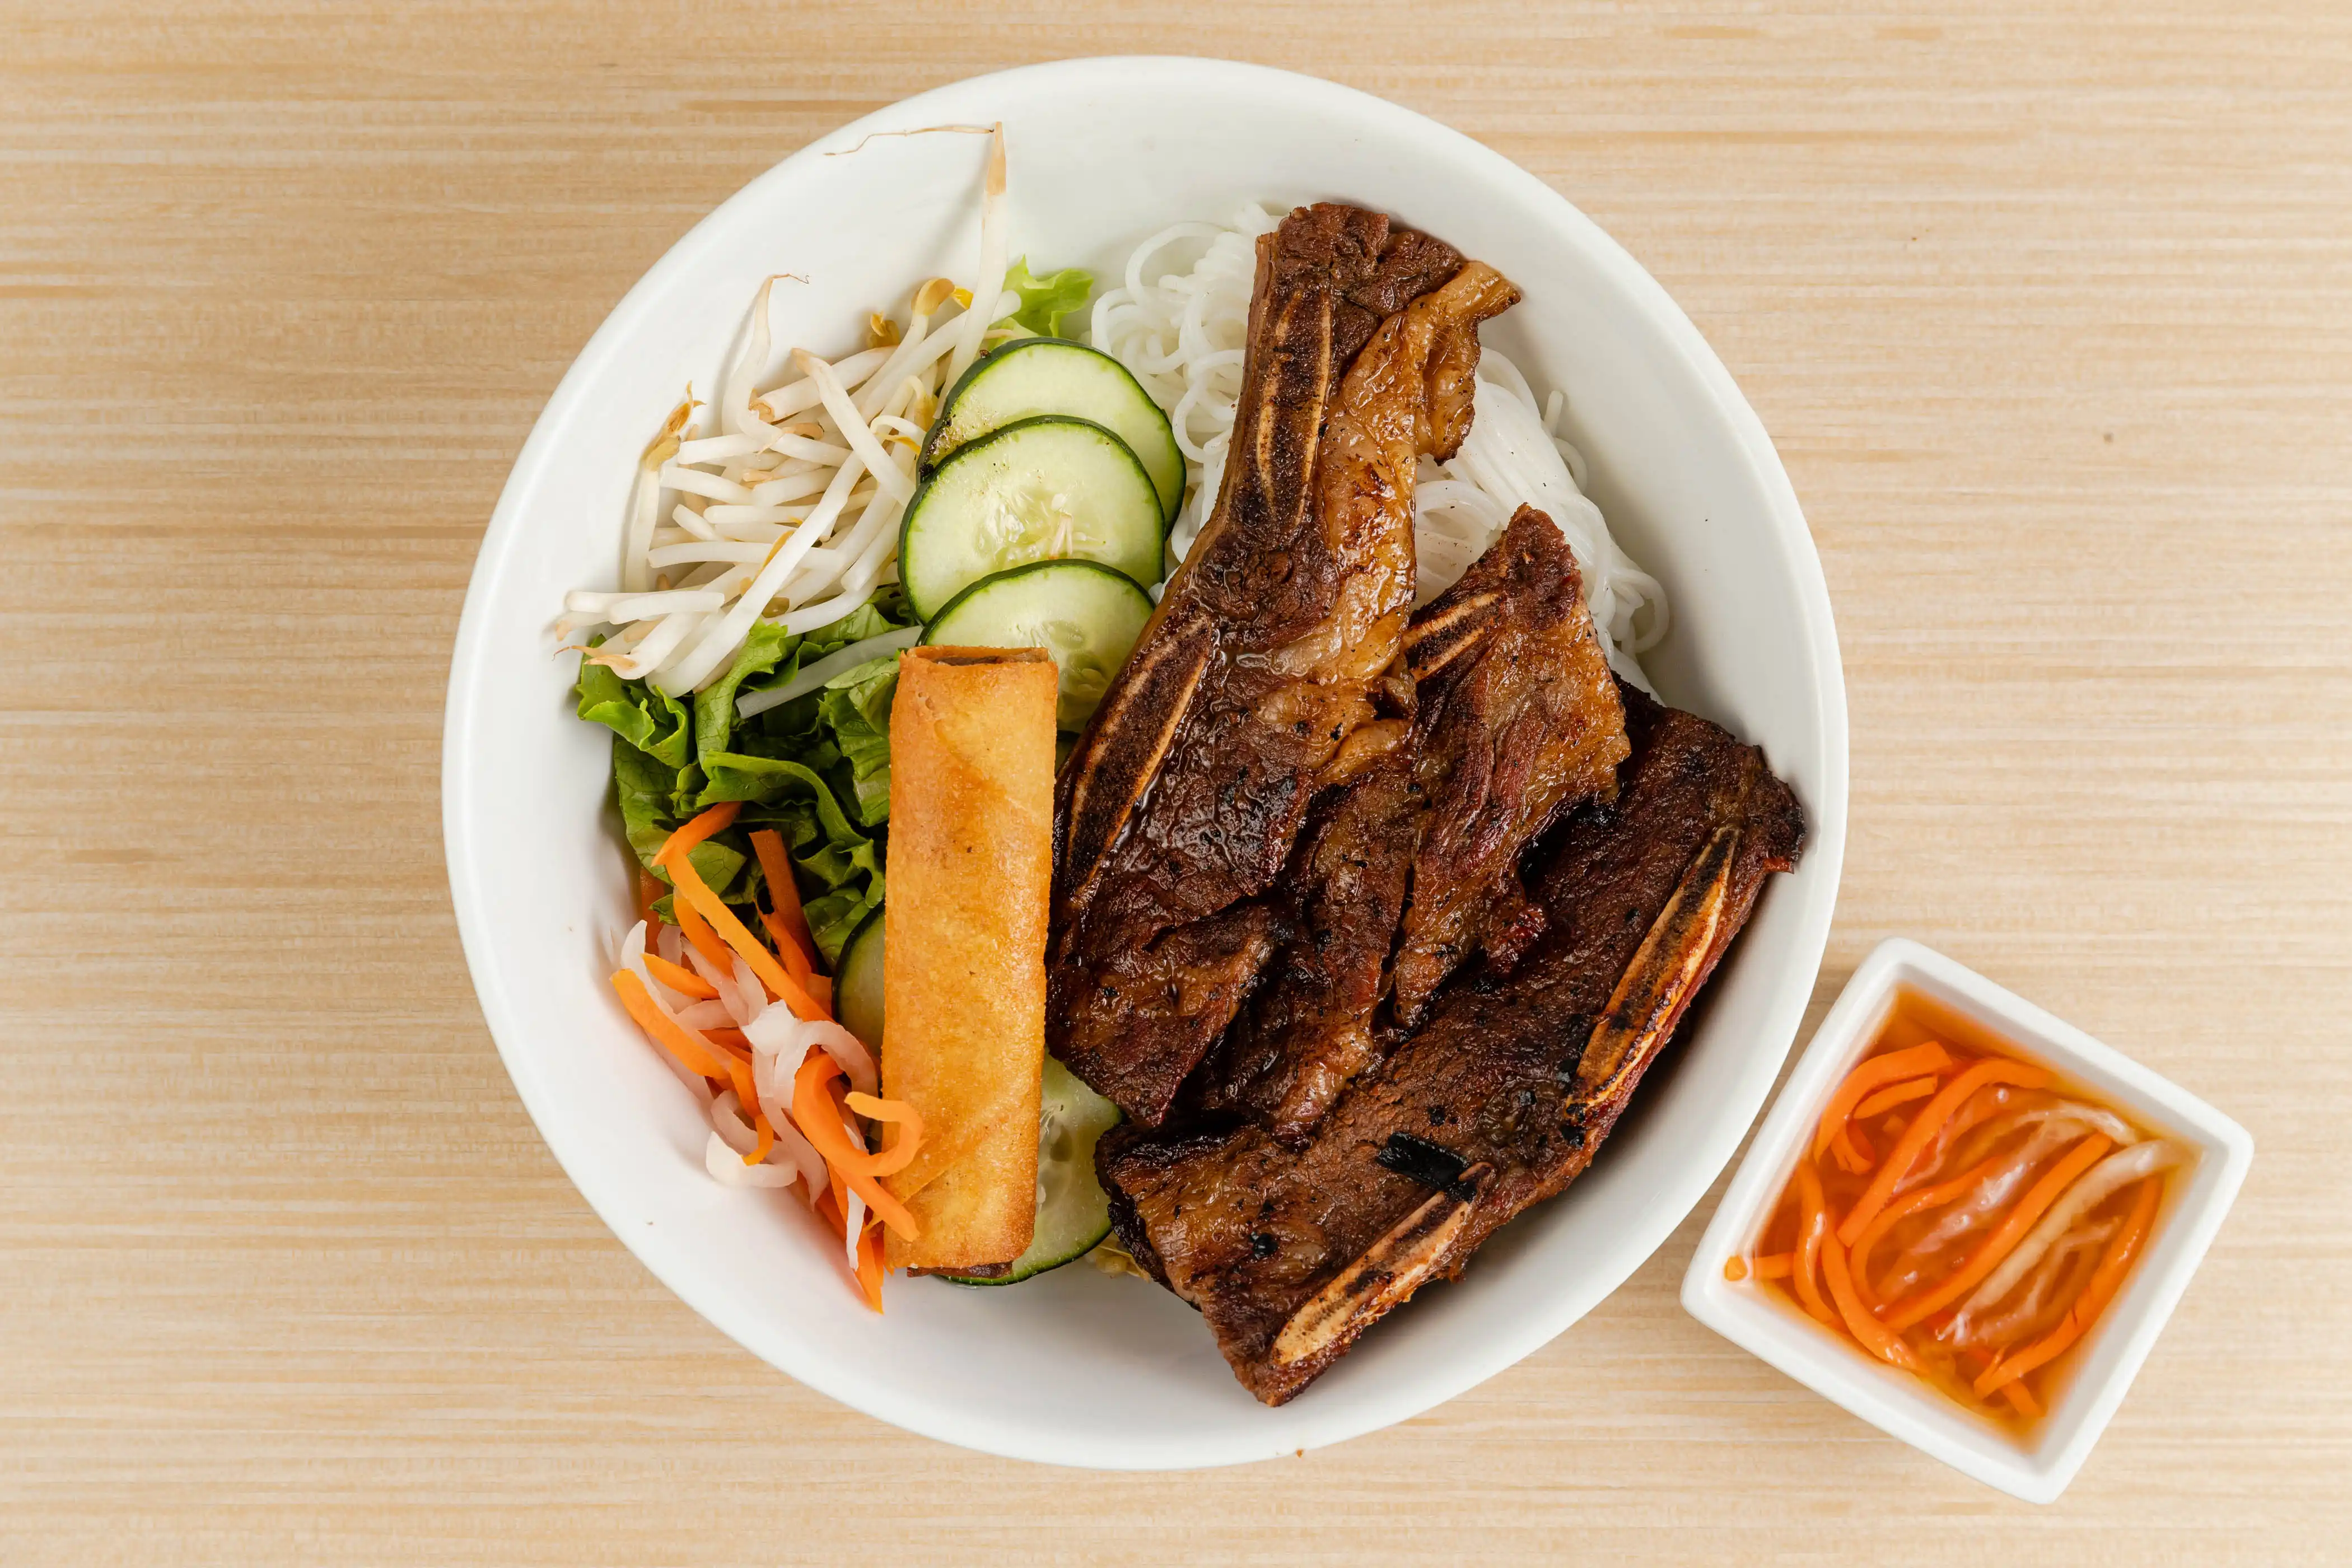 Rice Vermicelli with Grilled Beef